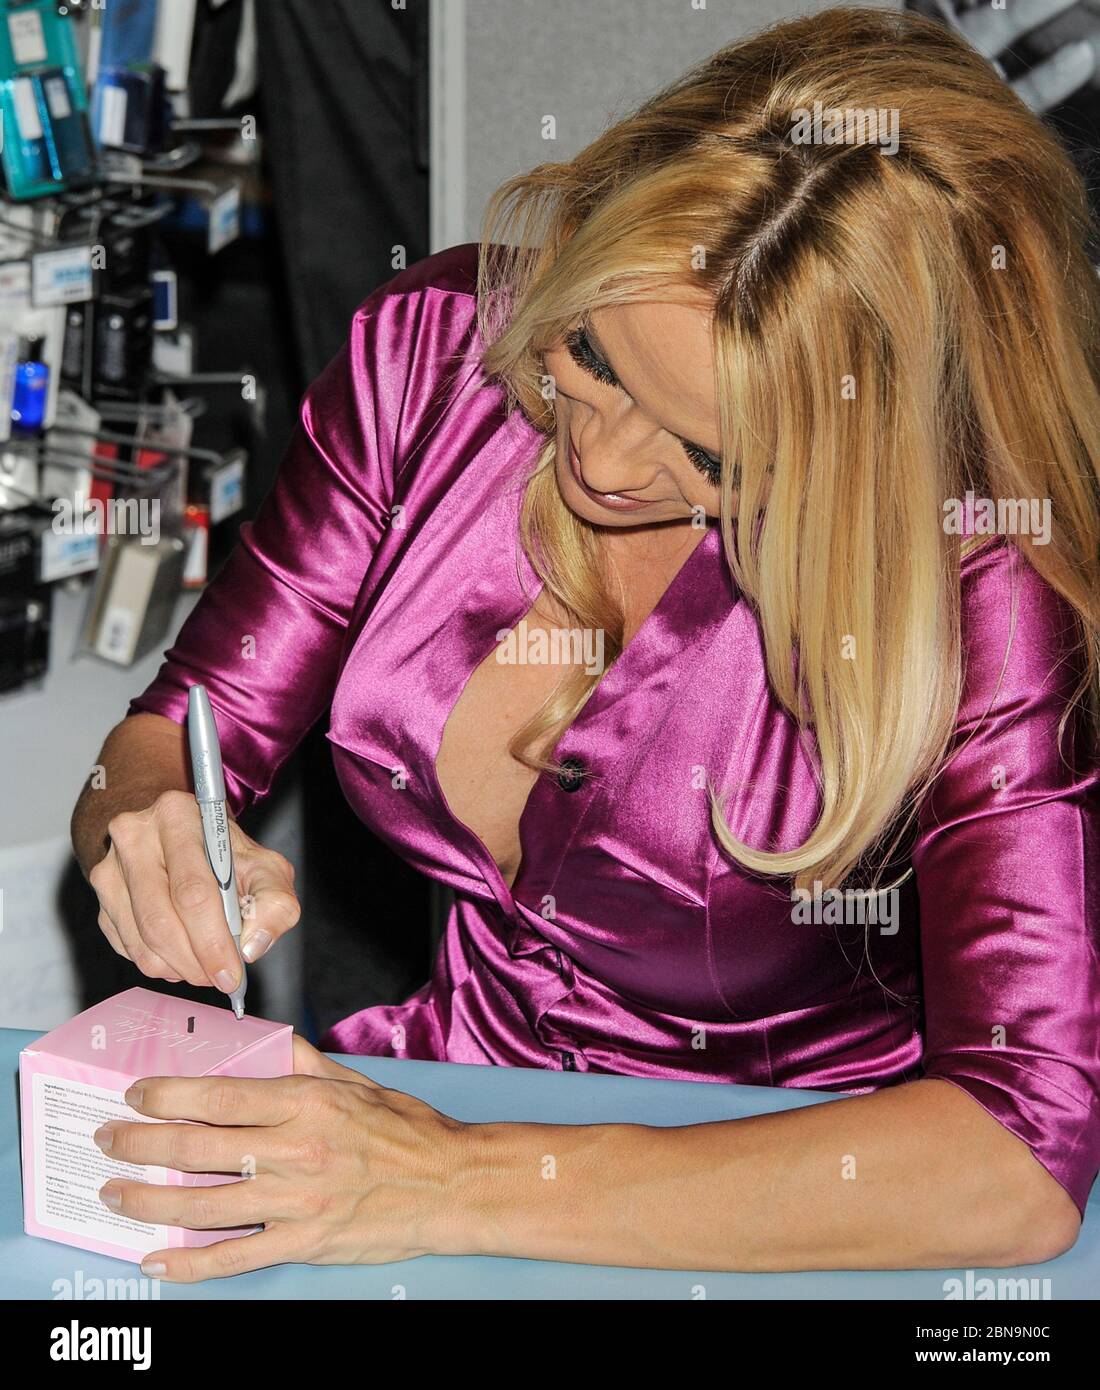 ARDMORE, PA, USA - JANUARY 23, 2010: Pamela Anderson Promotes Her New Fragrance 'Malibu' at Rite Aid. Stock Photo